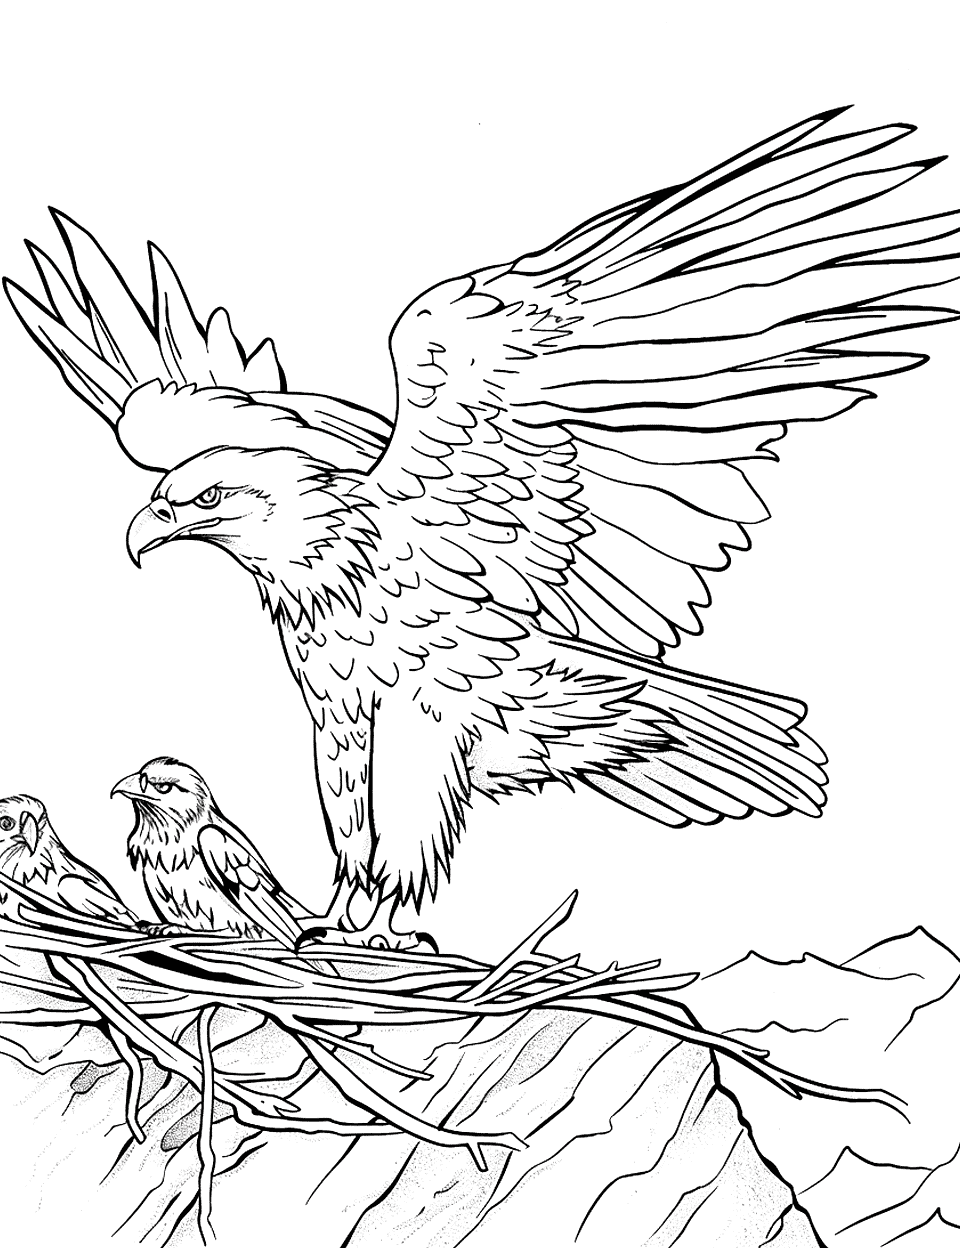 Eagle Teaching Chicks to Fly Coloring Page - An adult eagle flaps its wings, demonstrating flight to its chicks in a nest atop a simple cliff.